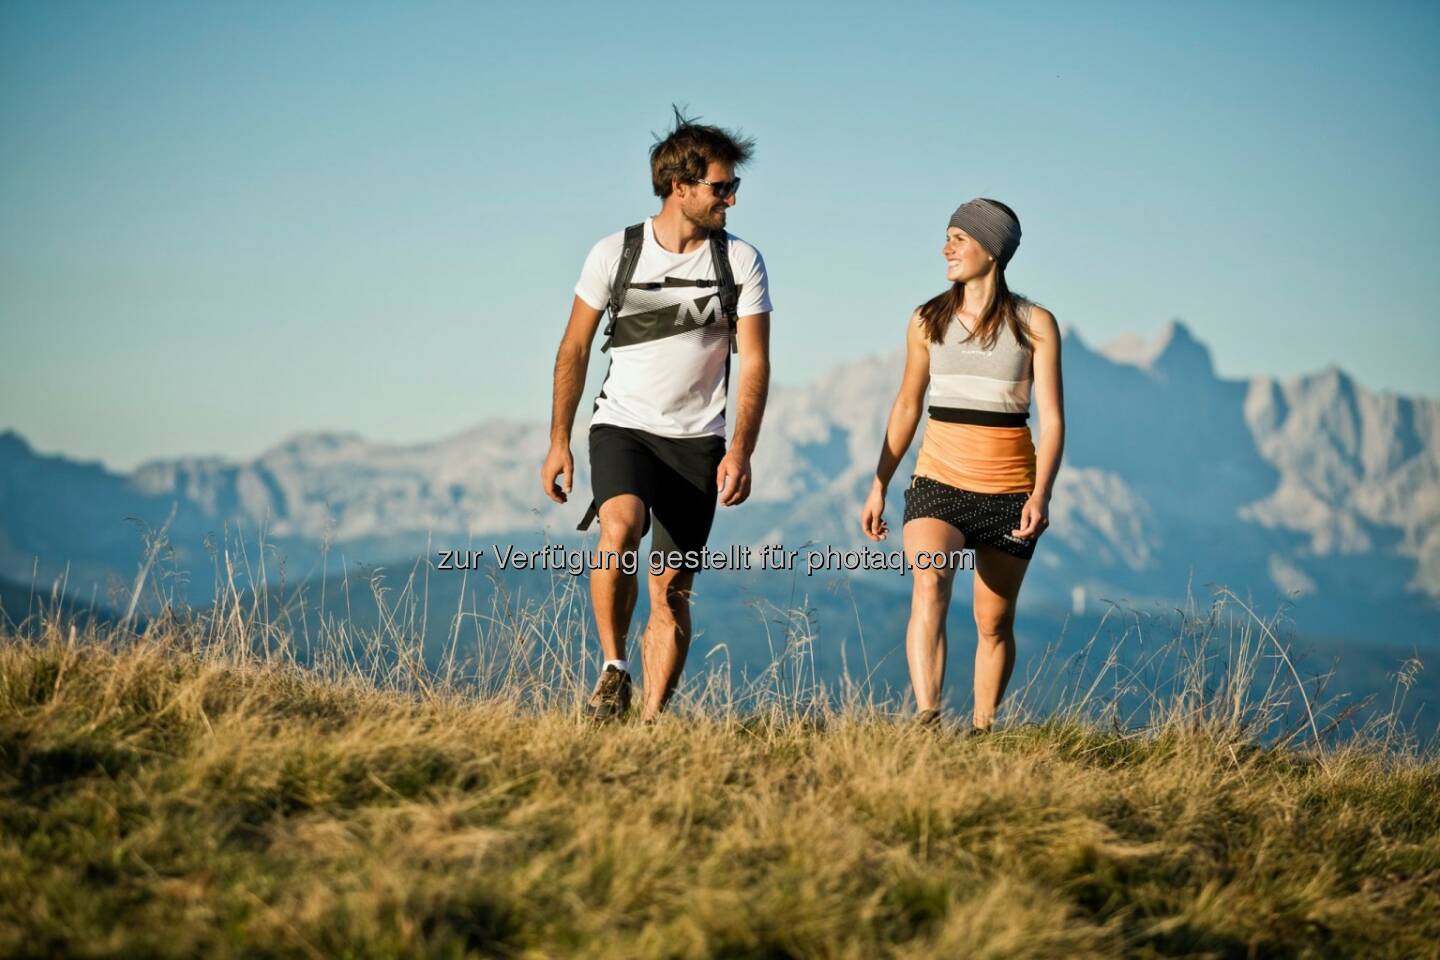 Lenzing: Sustainable clothing is becoming increasingly popular, also in the mountains. We are pleased that with Martini Sportswear, we have found a partner who uses our TENCEL™ fibers in its new summer collection: https://www.martini-sportswear.com/  Source: http://facebook.com/LenzingGroup